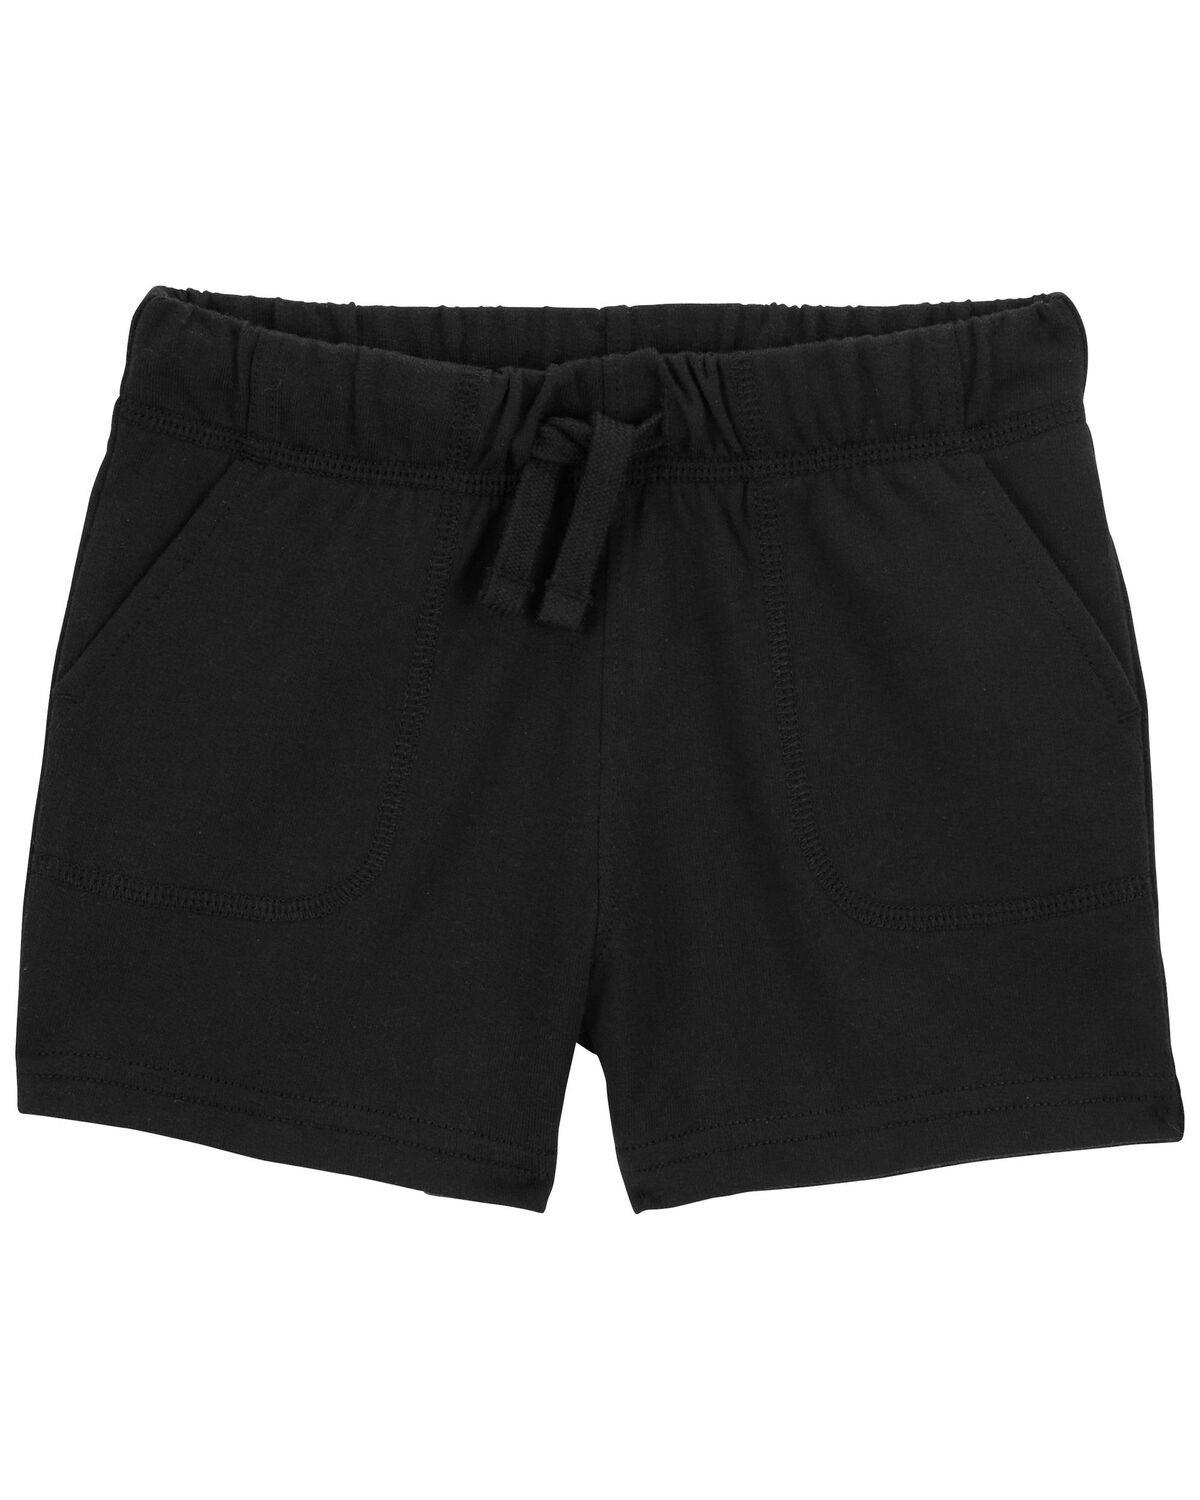 Toddler Pull-On Cotton Shorts